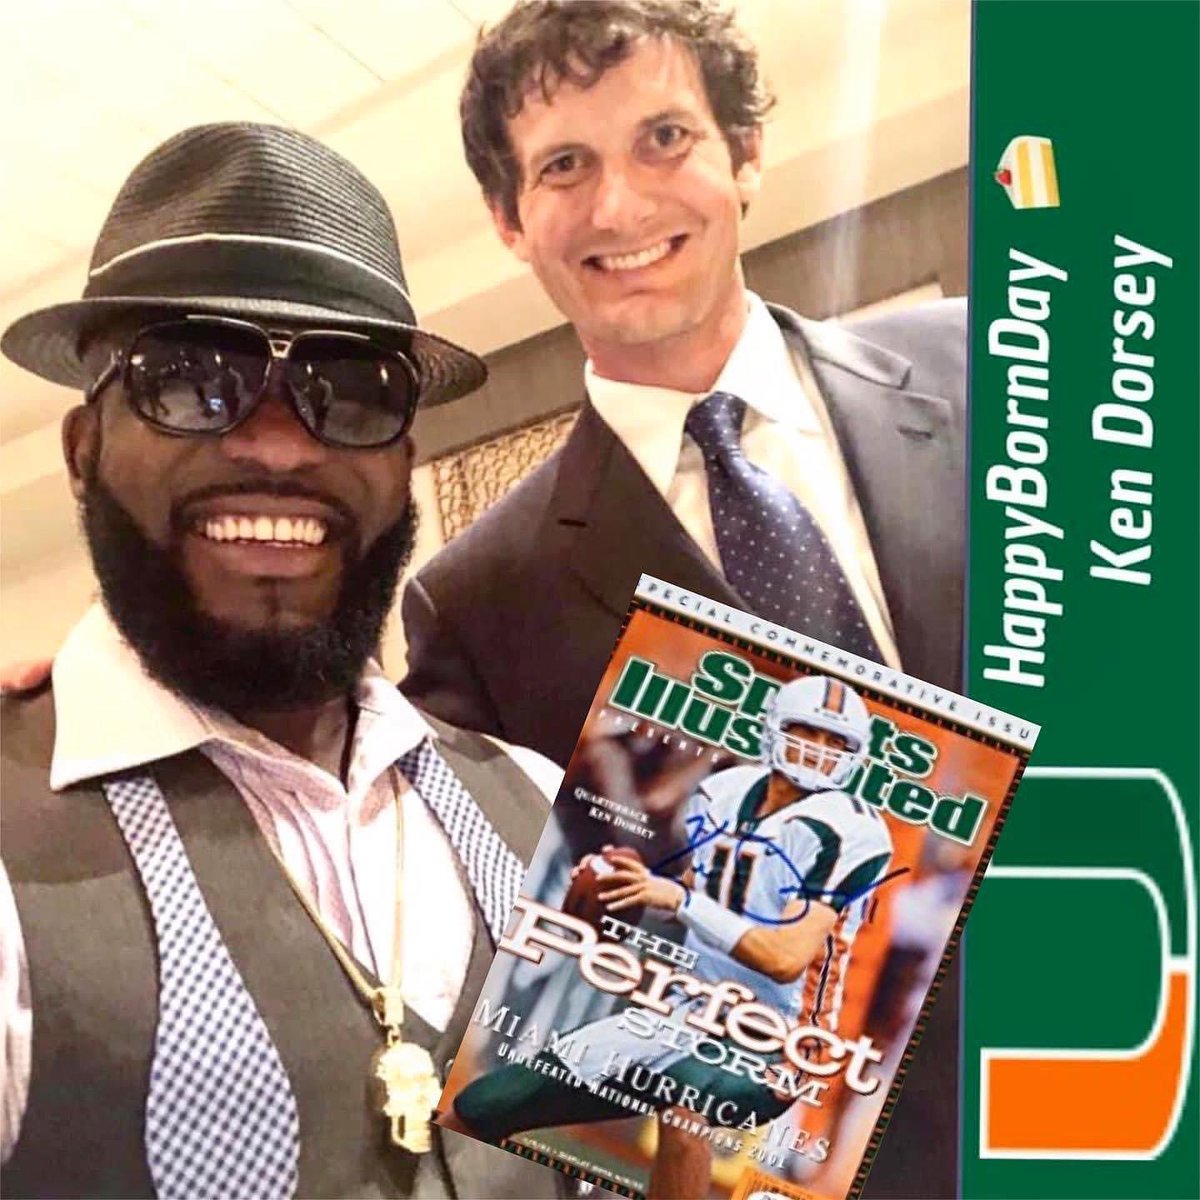 Everyone please wish a very #HappyBornDay to #KenDorsey, QB1 of CFGT (College Football Greatest Team)🎊🎉🍾🎂

For @canesfootball , Dorsey was known as a consummate winner, leading the Hurricanes to the 2001 national championship and posting a record of 38–2 

✅ Total offense